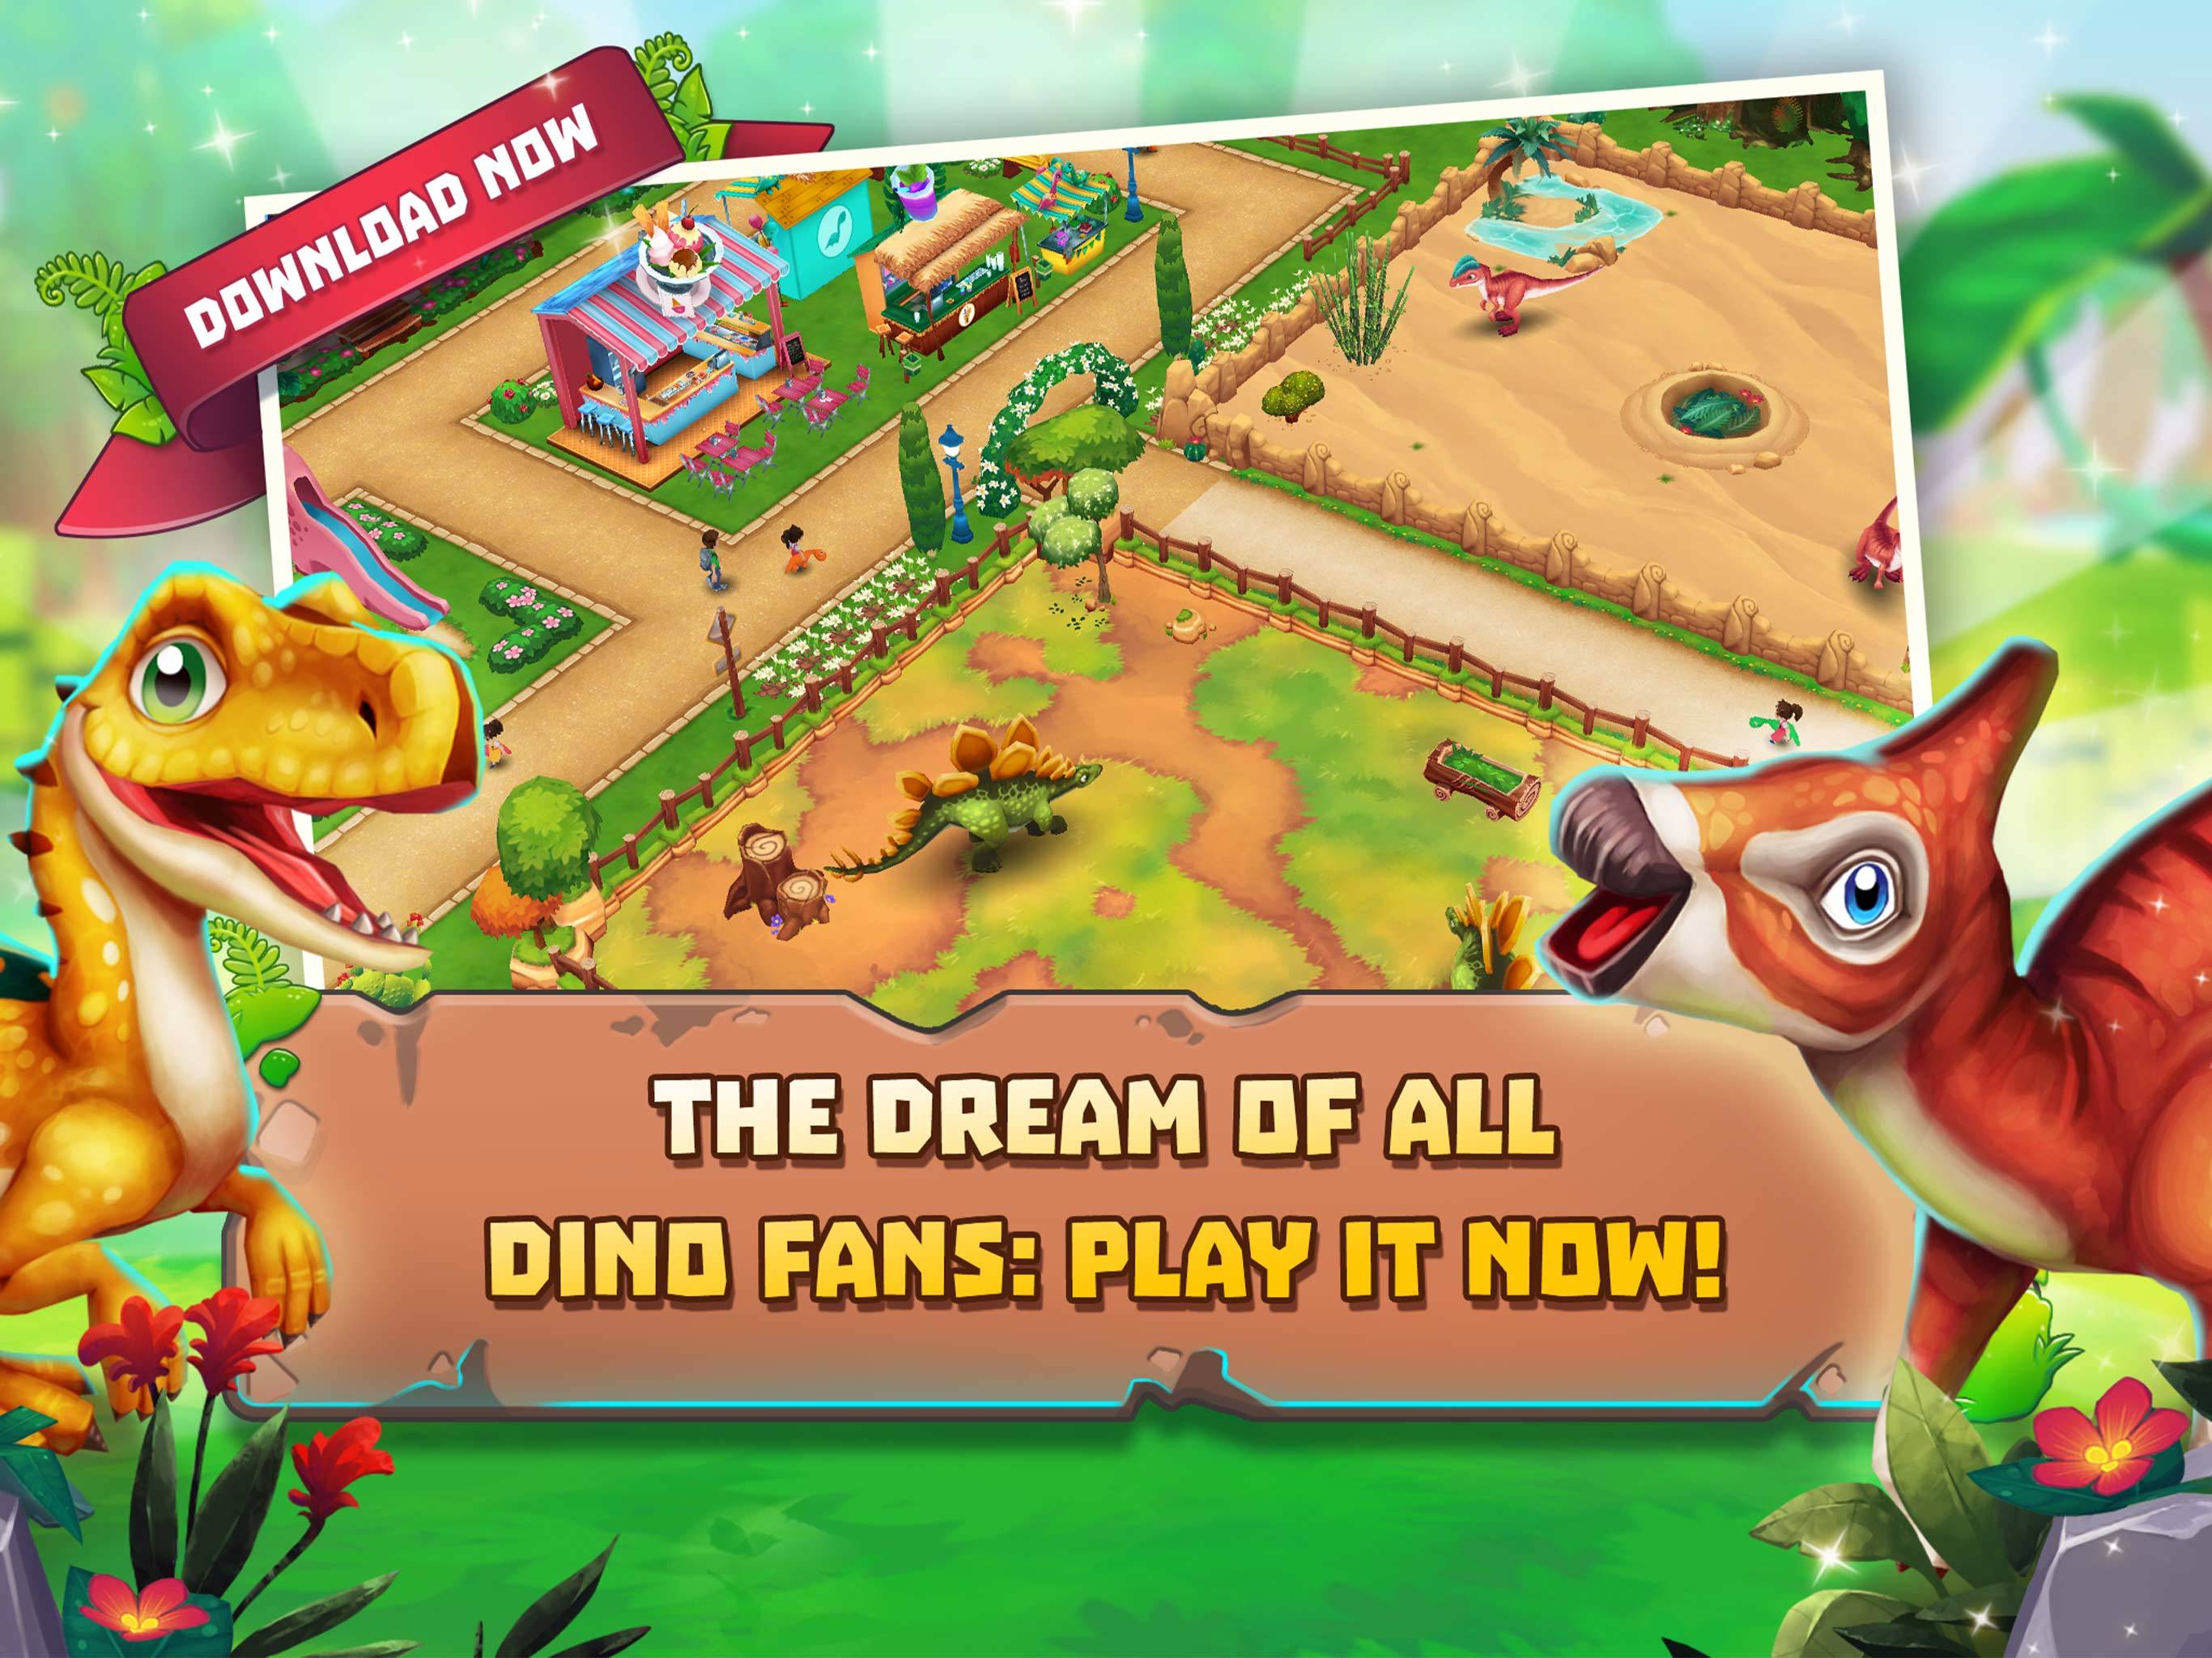 Dinosaur games for all ages on the App Store